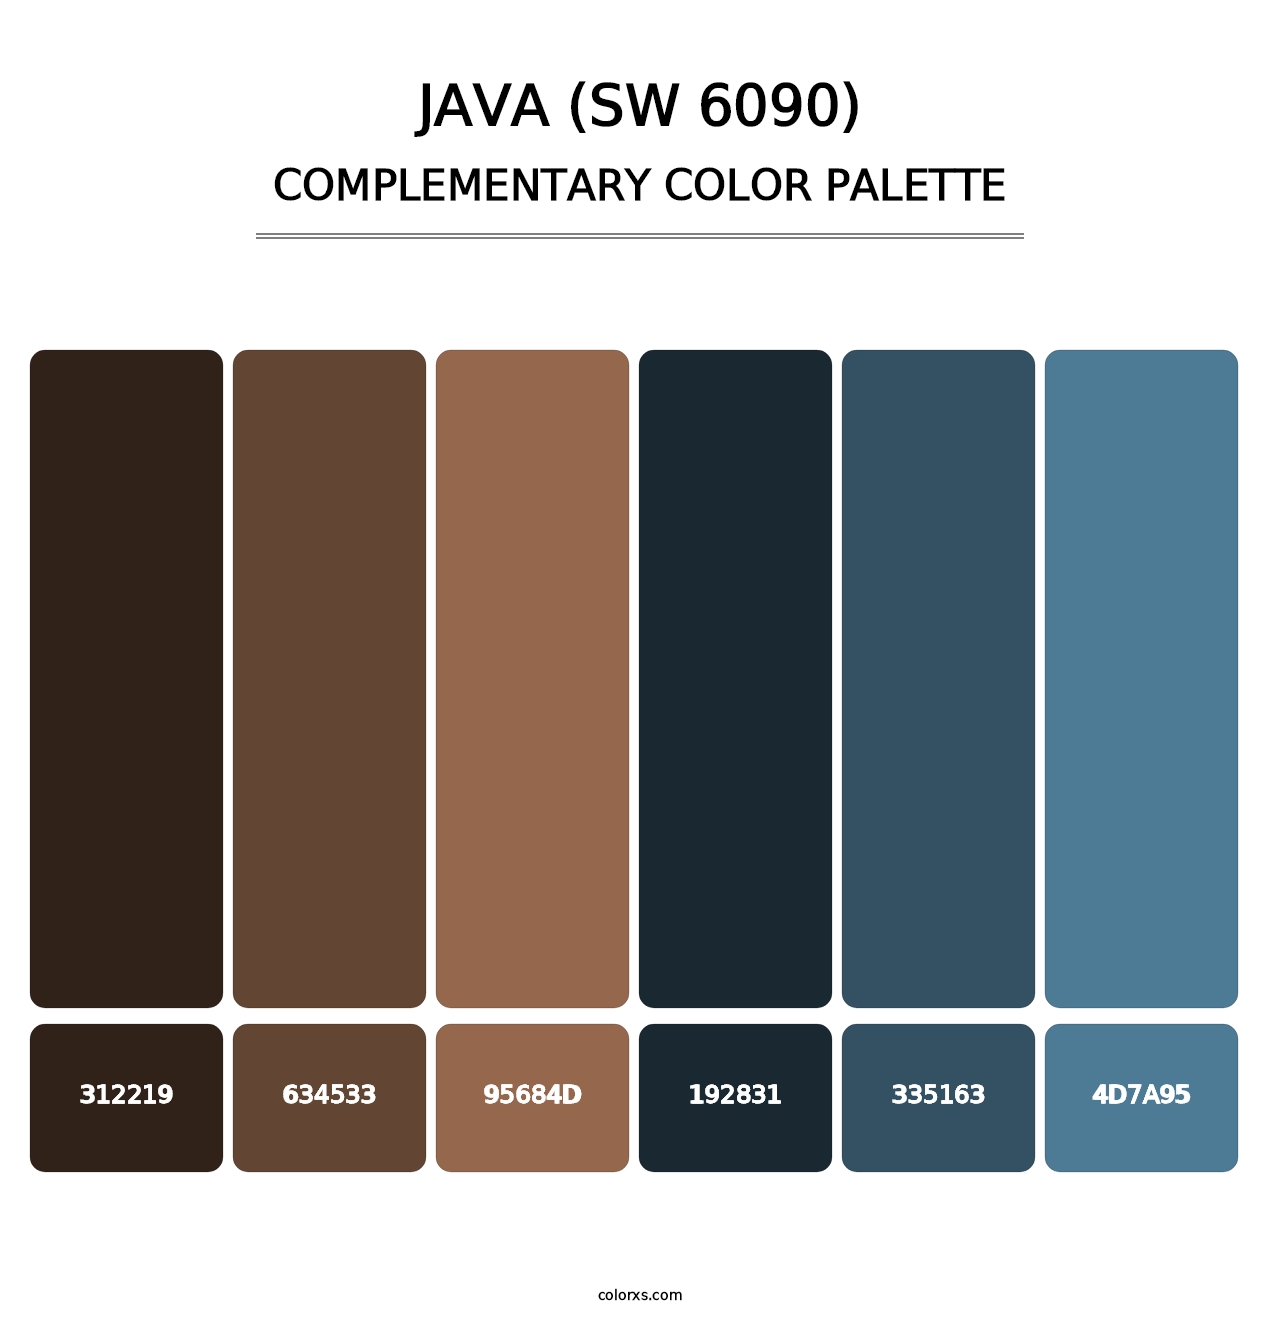 Java (SW 6090) - Complementary Color Palette